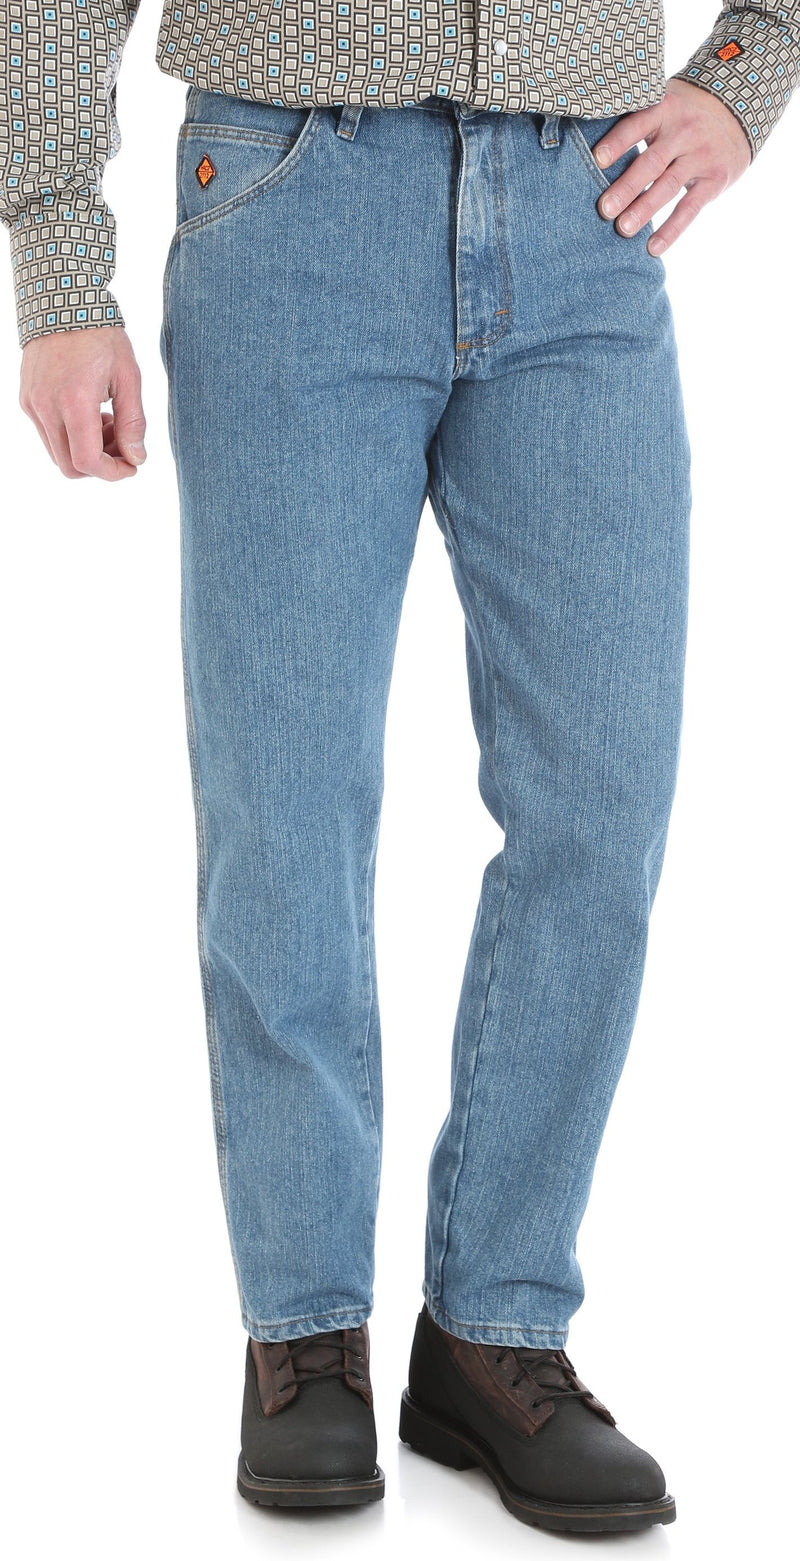 Wrangler FRCV50S Flame Resistant Cool Vantage Relaxed Fit Jean